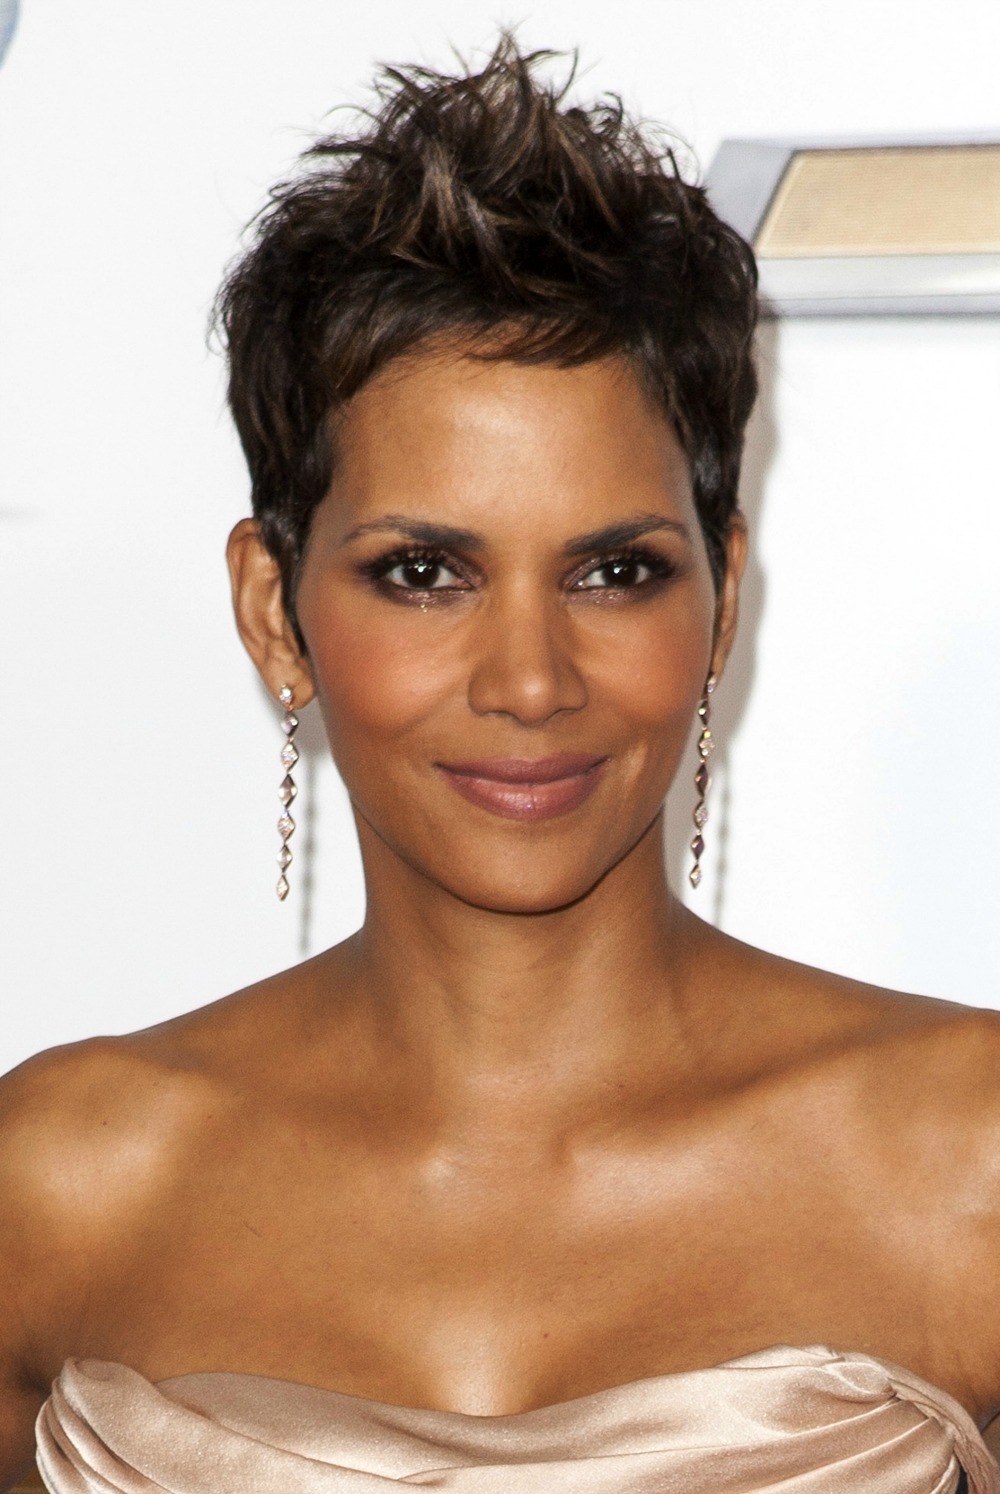 The Pixie Haircut - Celebrity Women Who Sport The Look